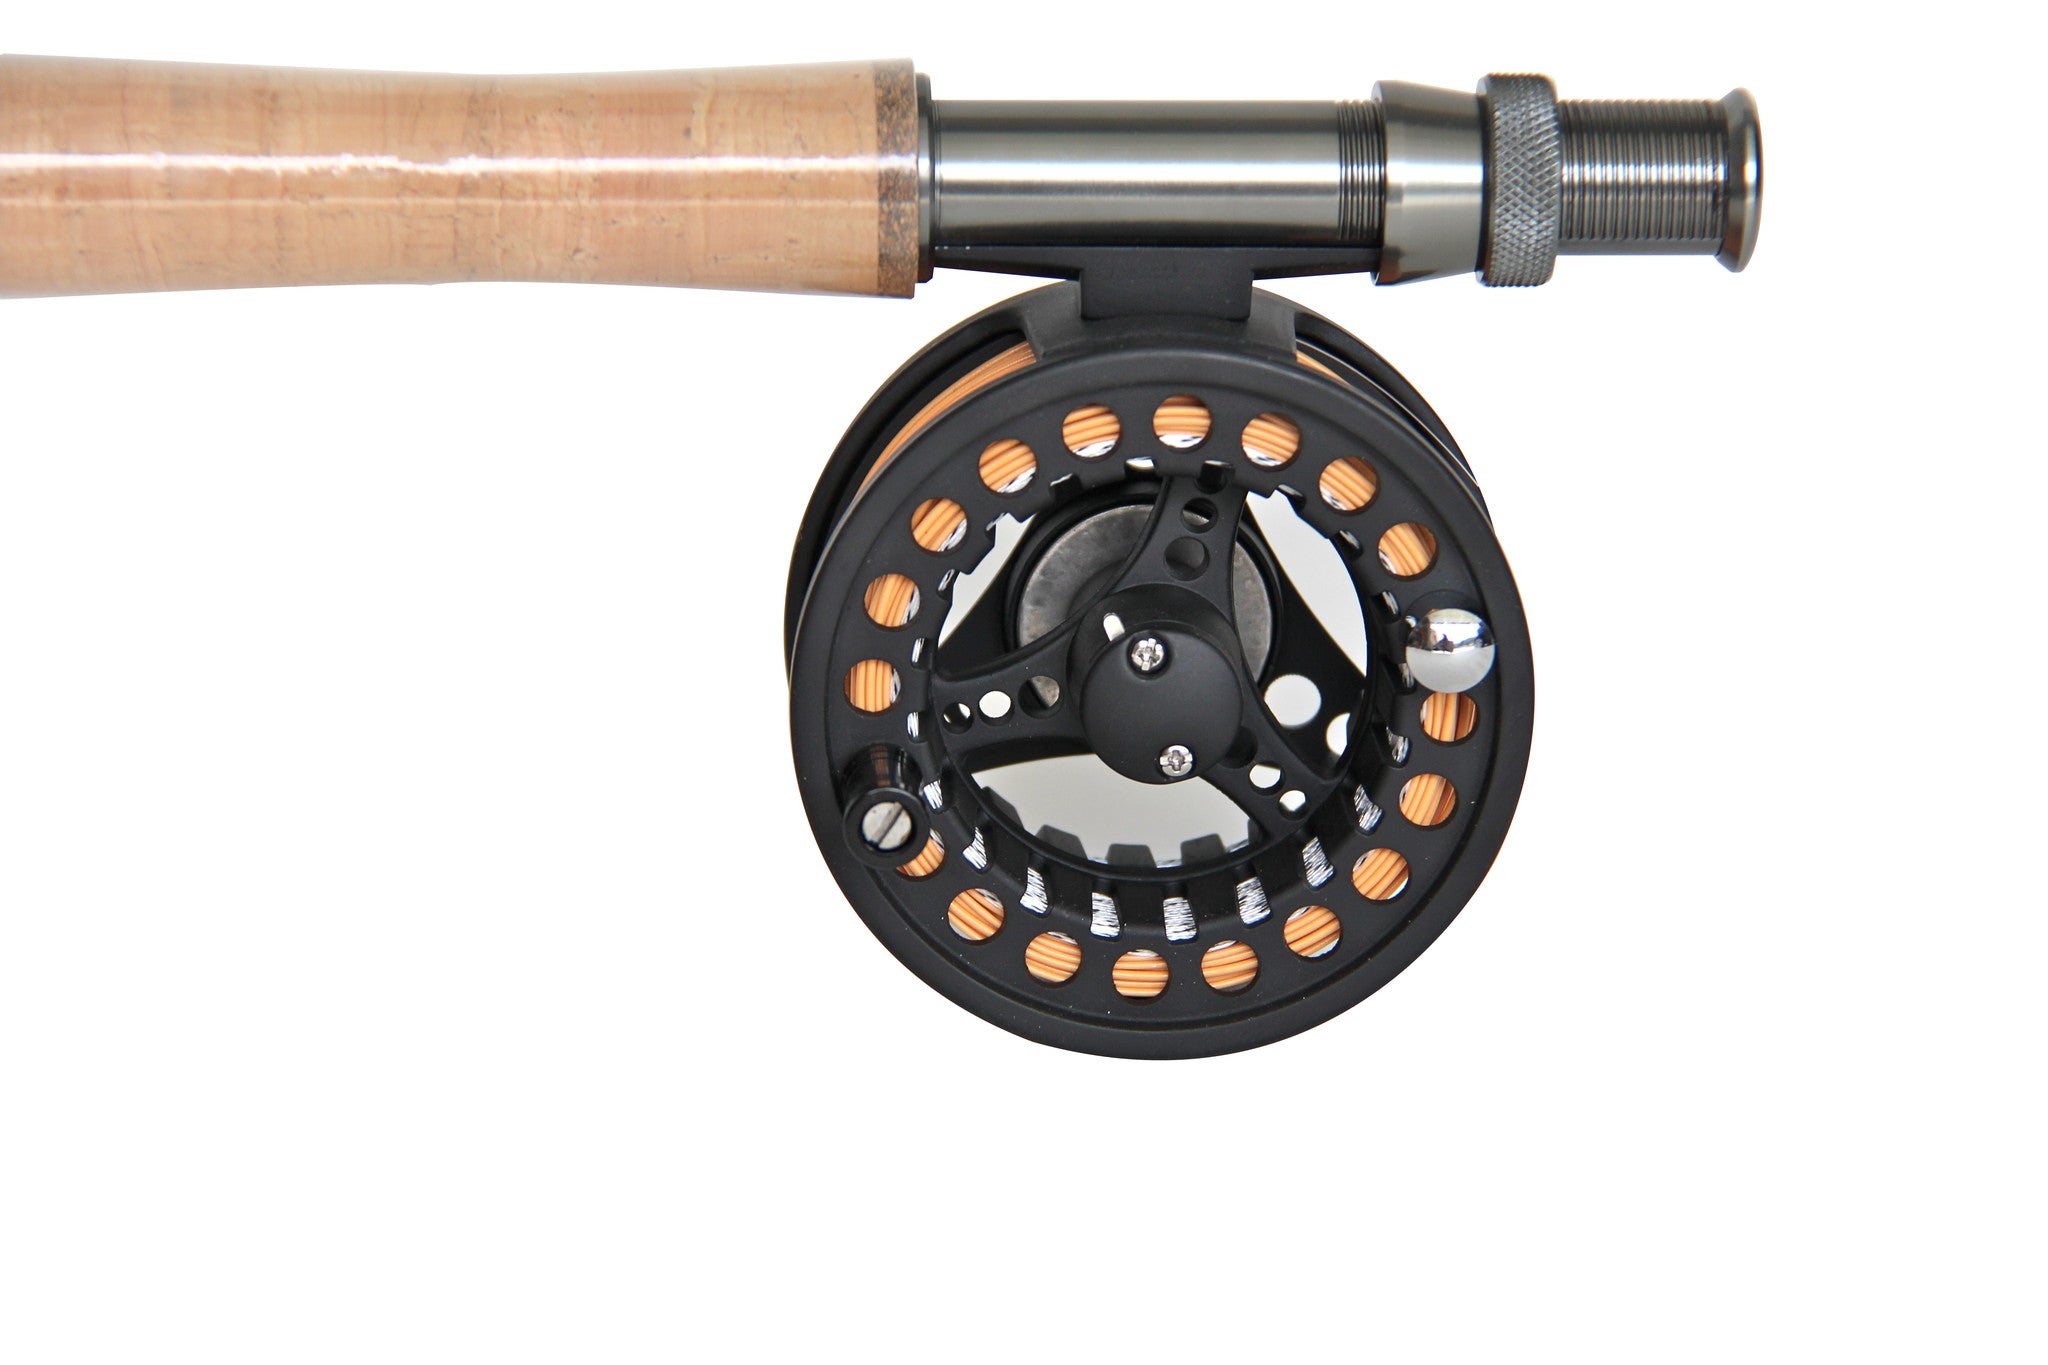 Fly Fishing Combo Fishing Rod & Reel Combos 2 Fly Line Weight for sale